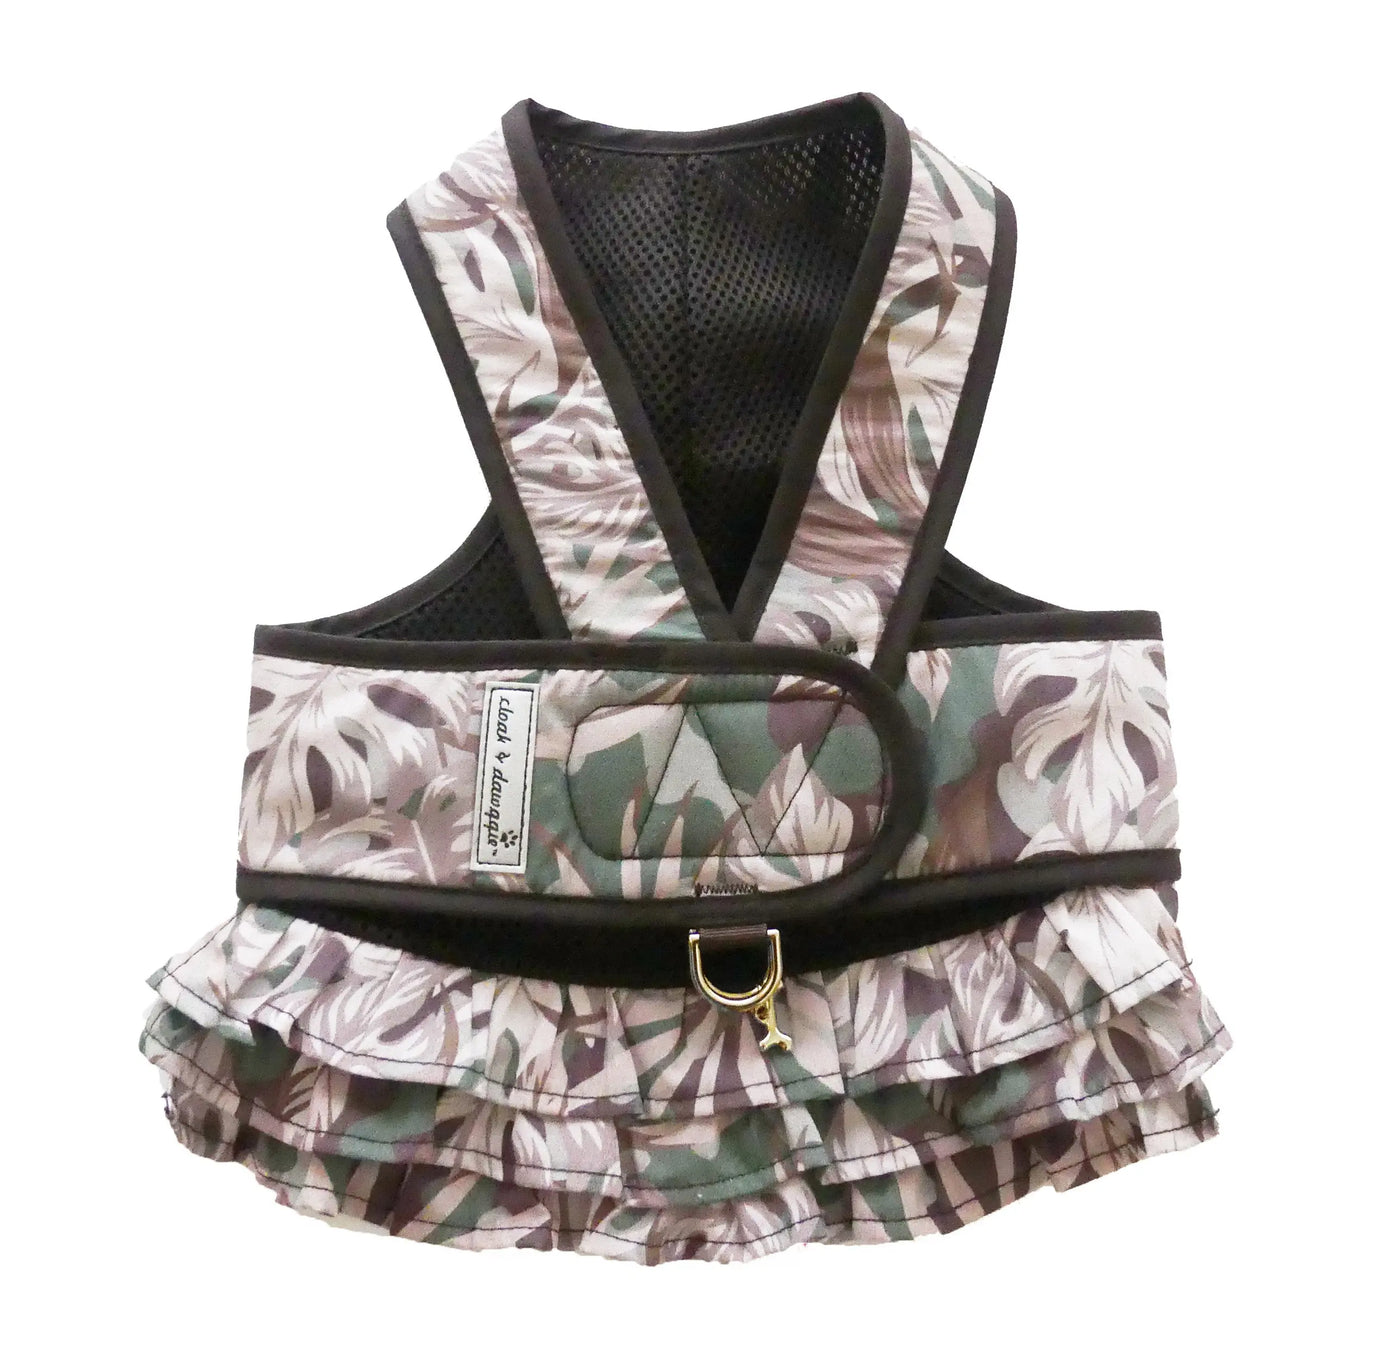 Floral Camo Dog Skirt for Step N Go Harness